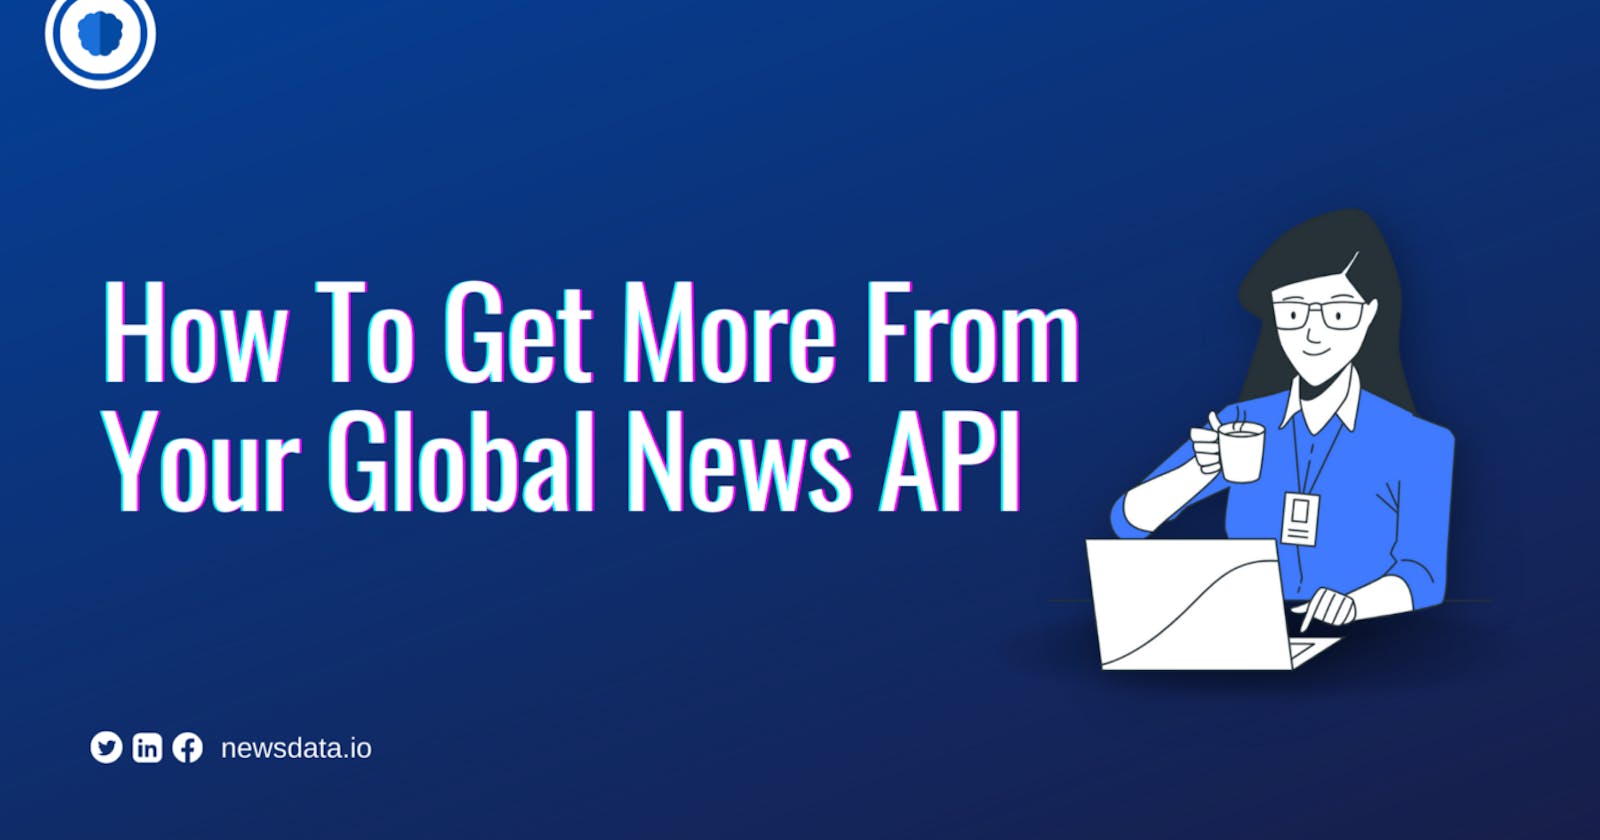 How To Get More From Your Global News API